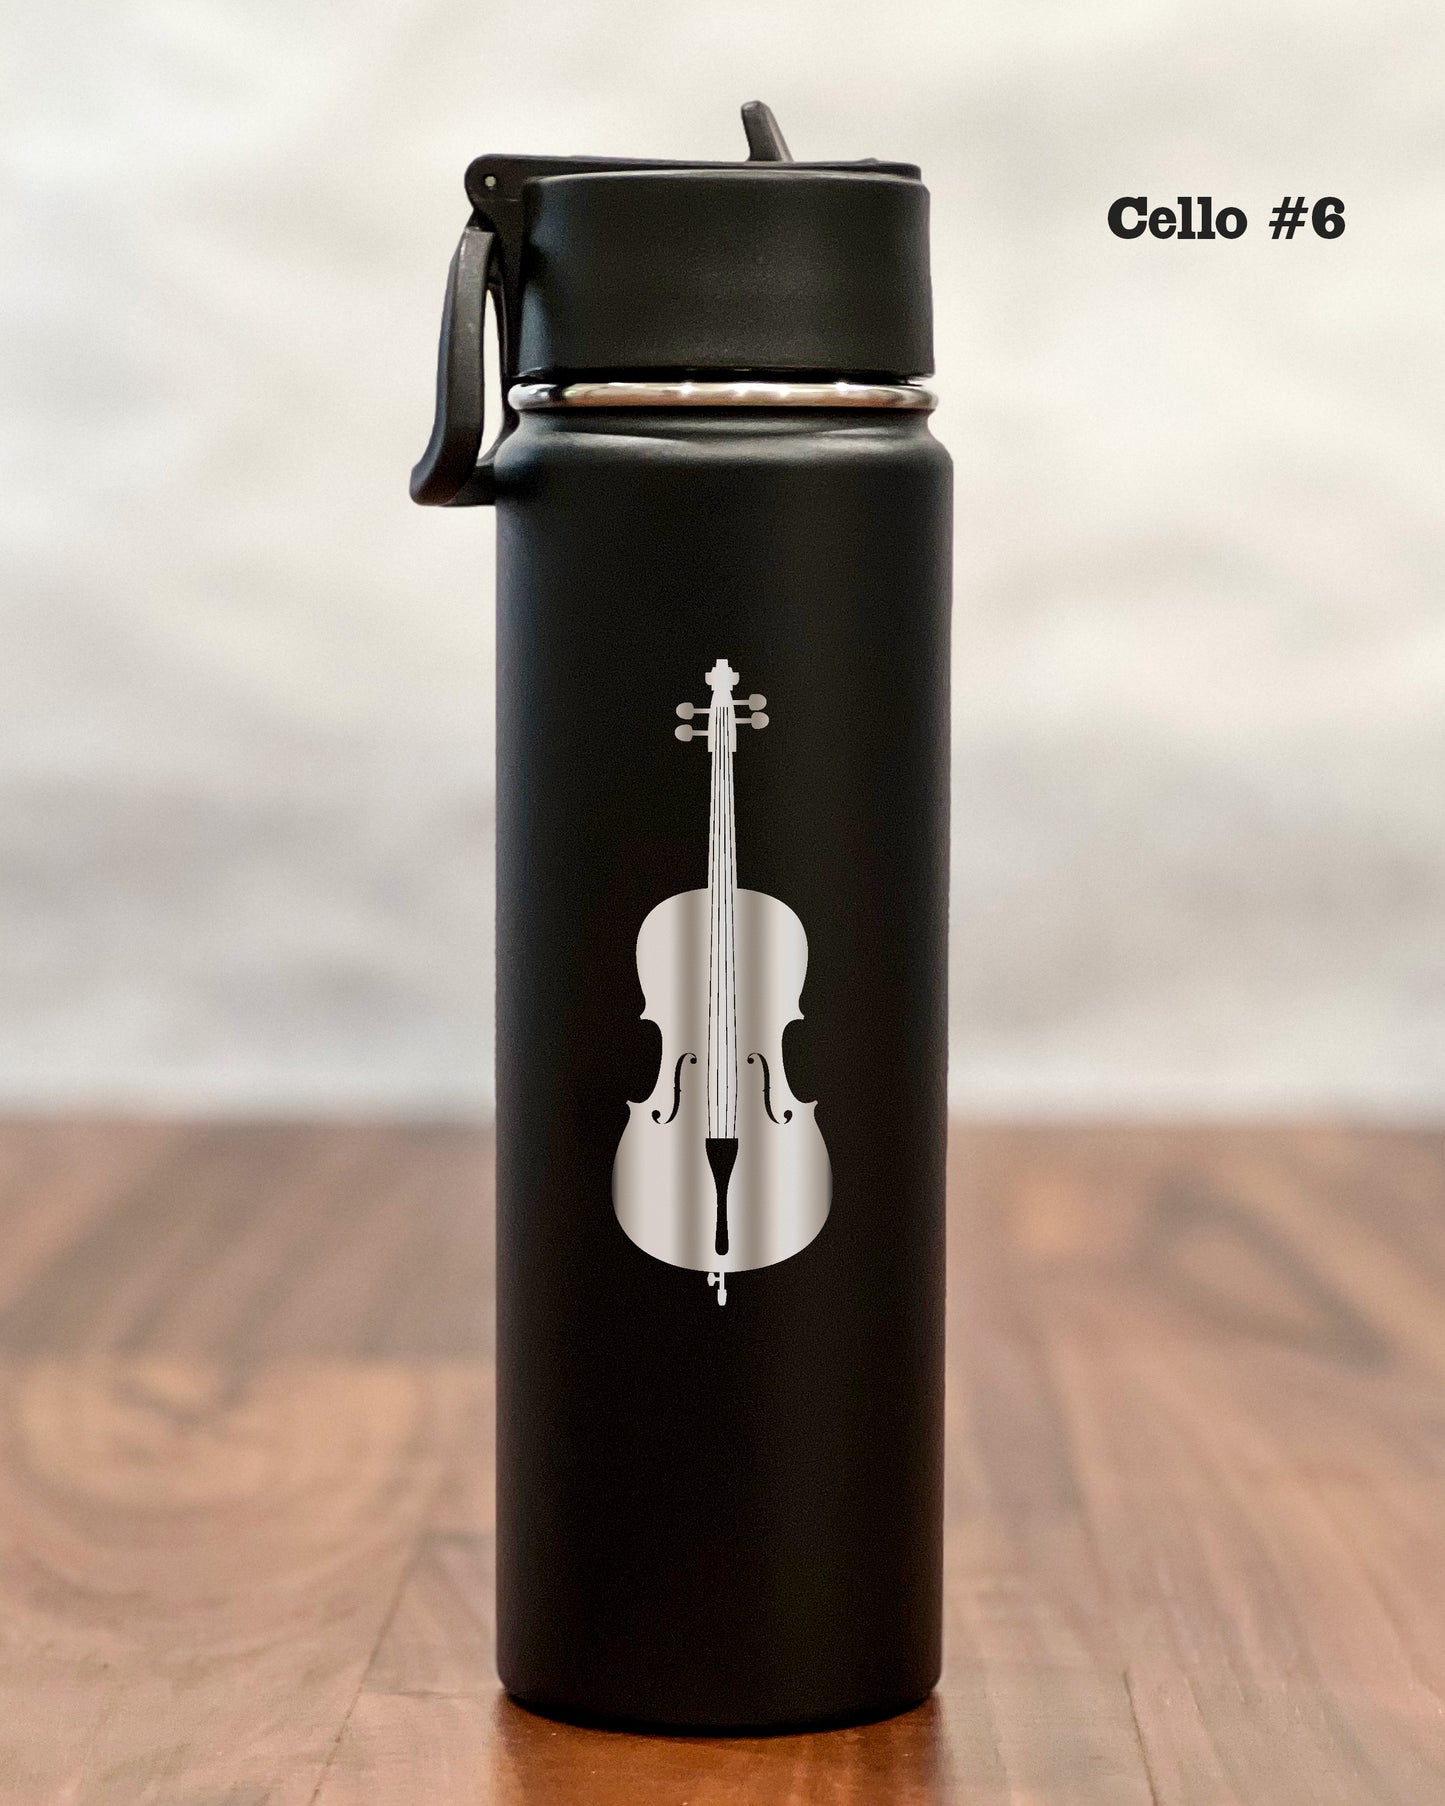 24 ounce Water Bottle with engraved Cello